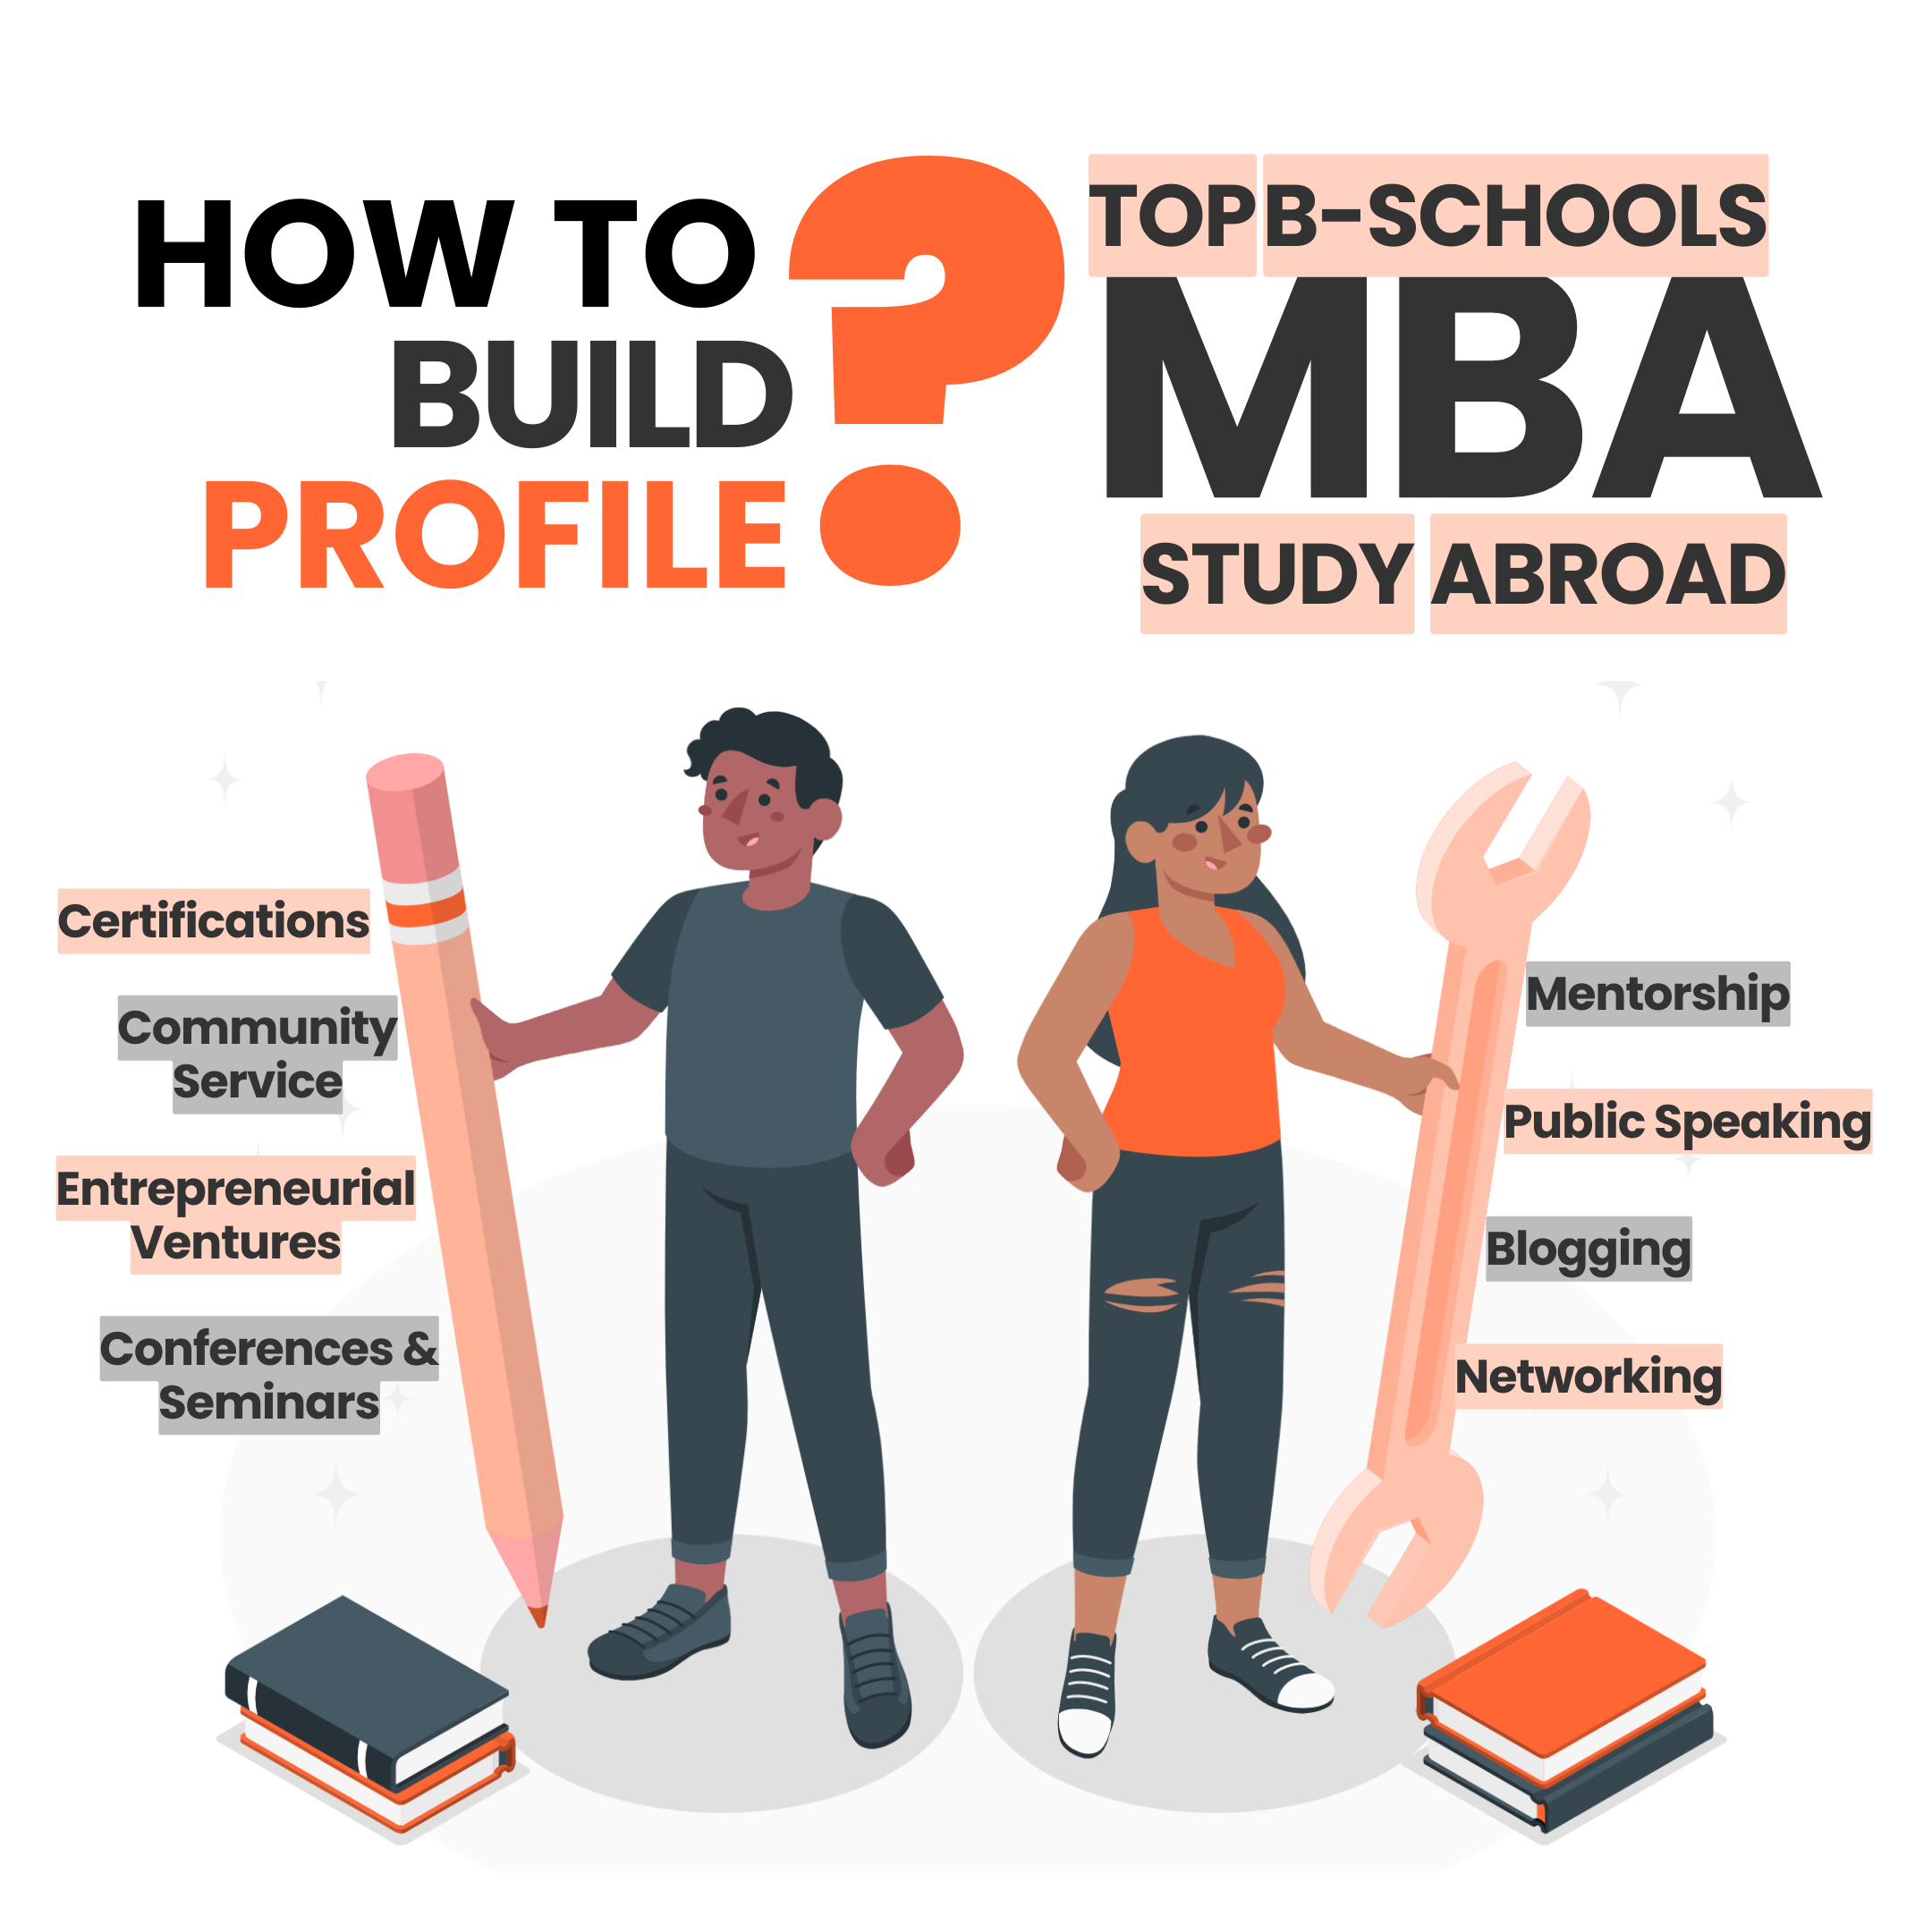 How to build a strong profile to pursue MBA as a study abroad option?